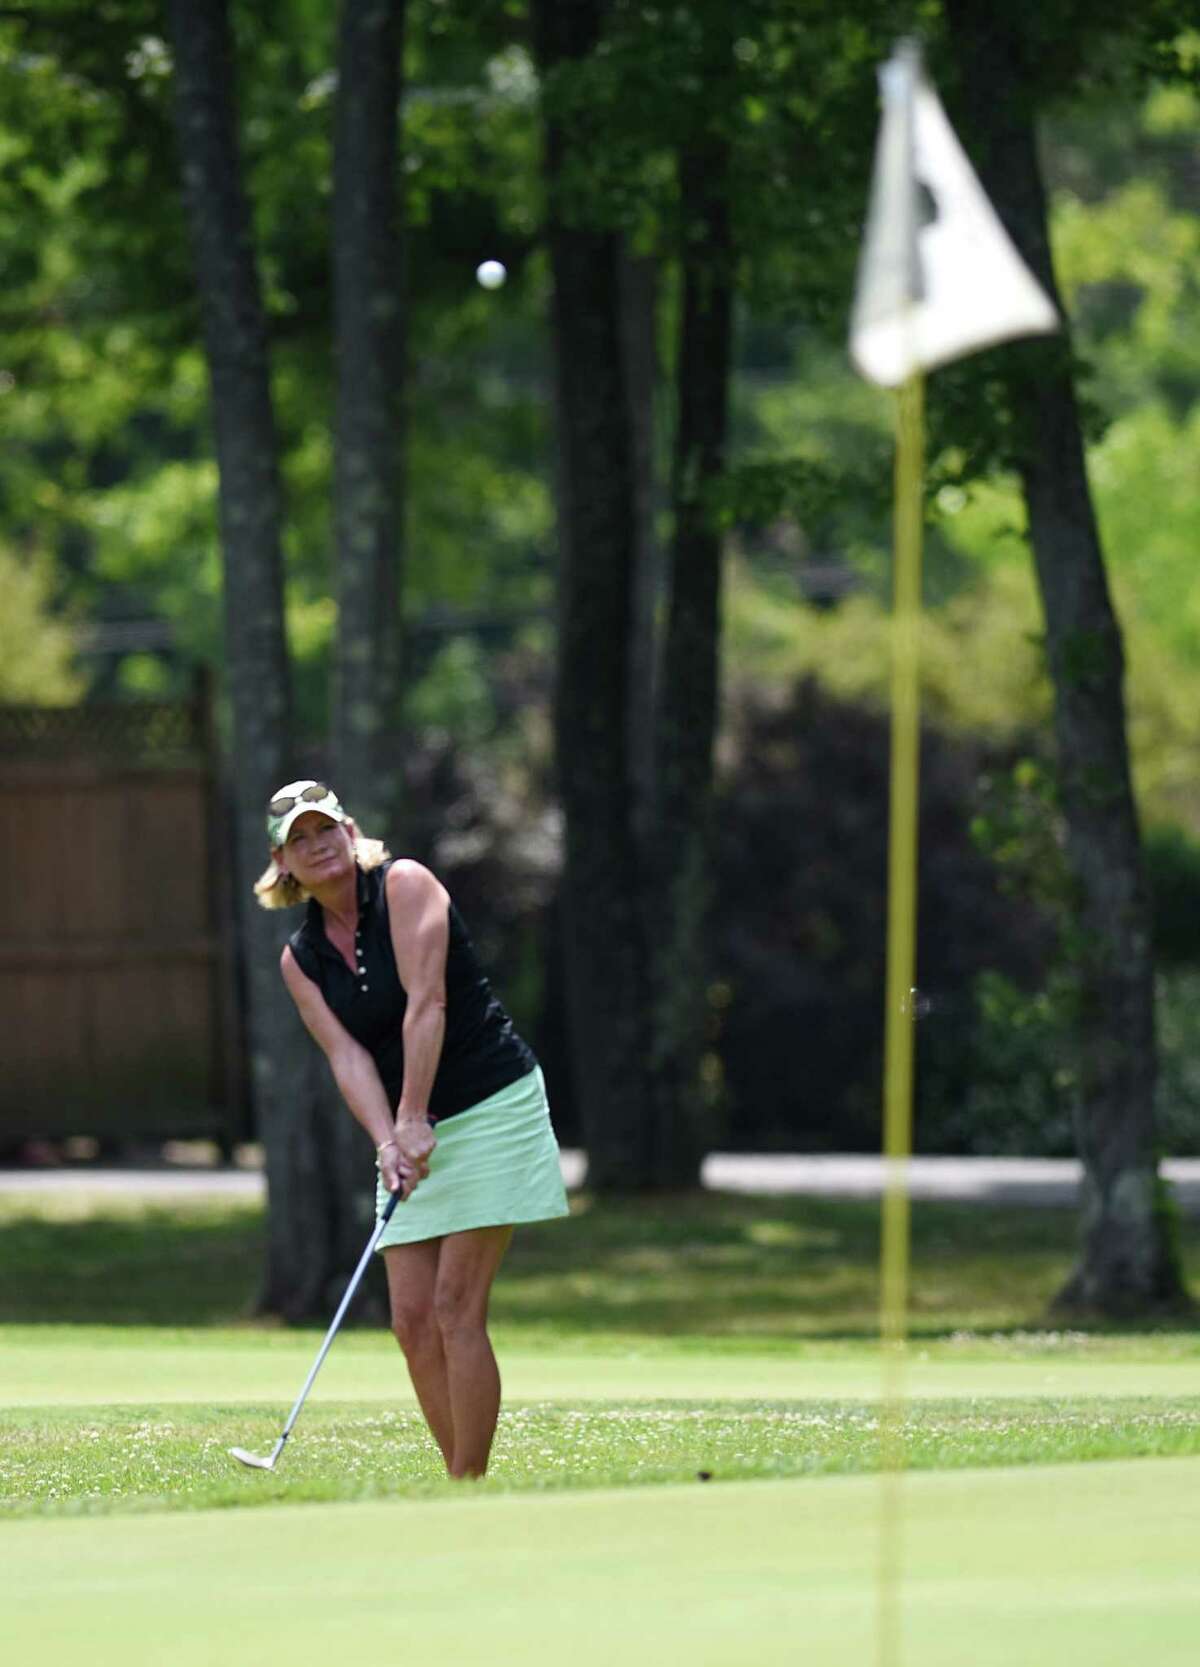 Pam Grunow chips onto the green during the Greenwich Ladies Town Golf Tournament at Griffith E. Harris Golf on Monday in Greenwich. Grunow won the townwide championship, shooting an 82.